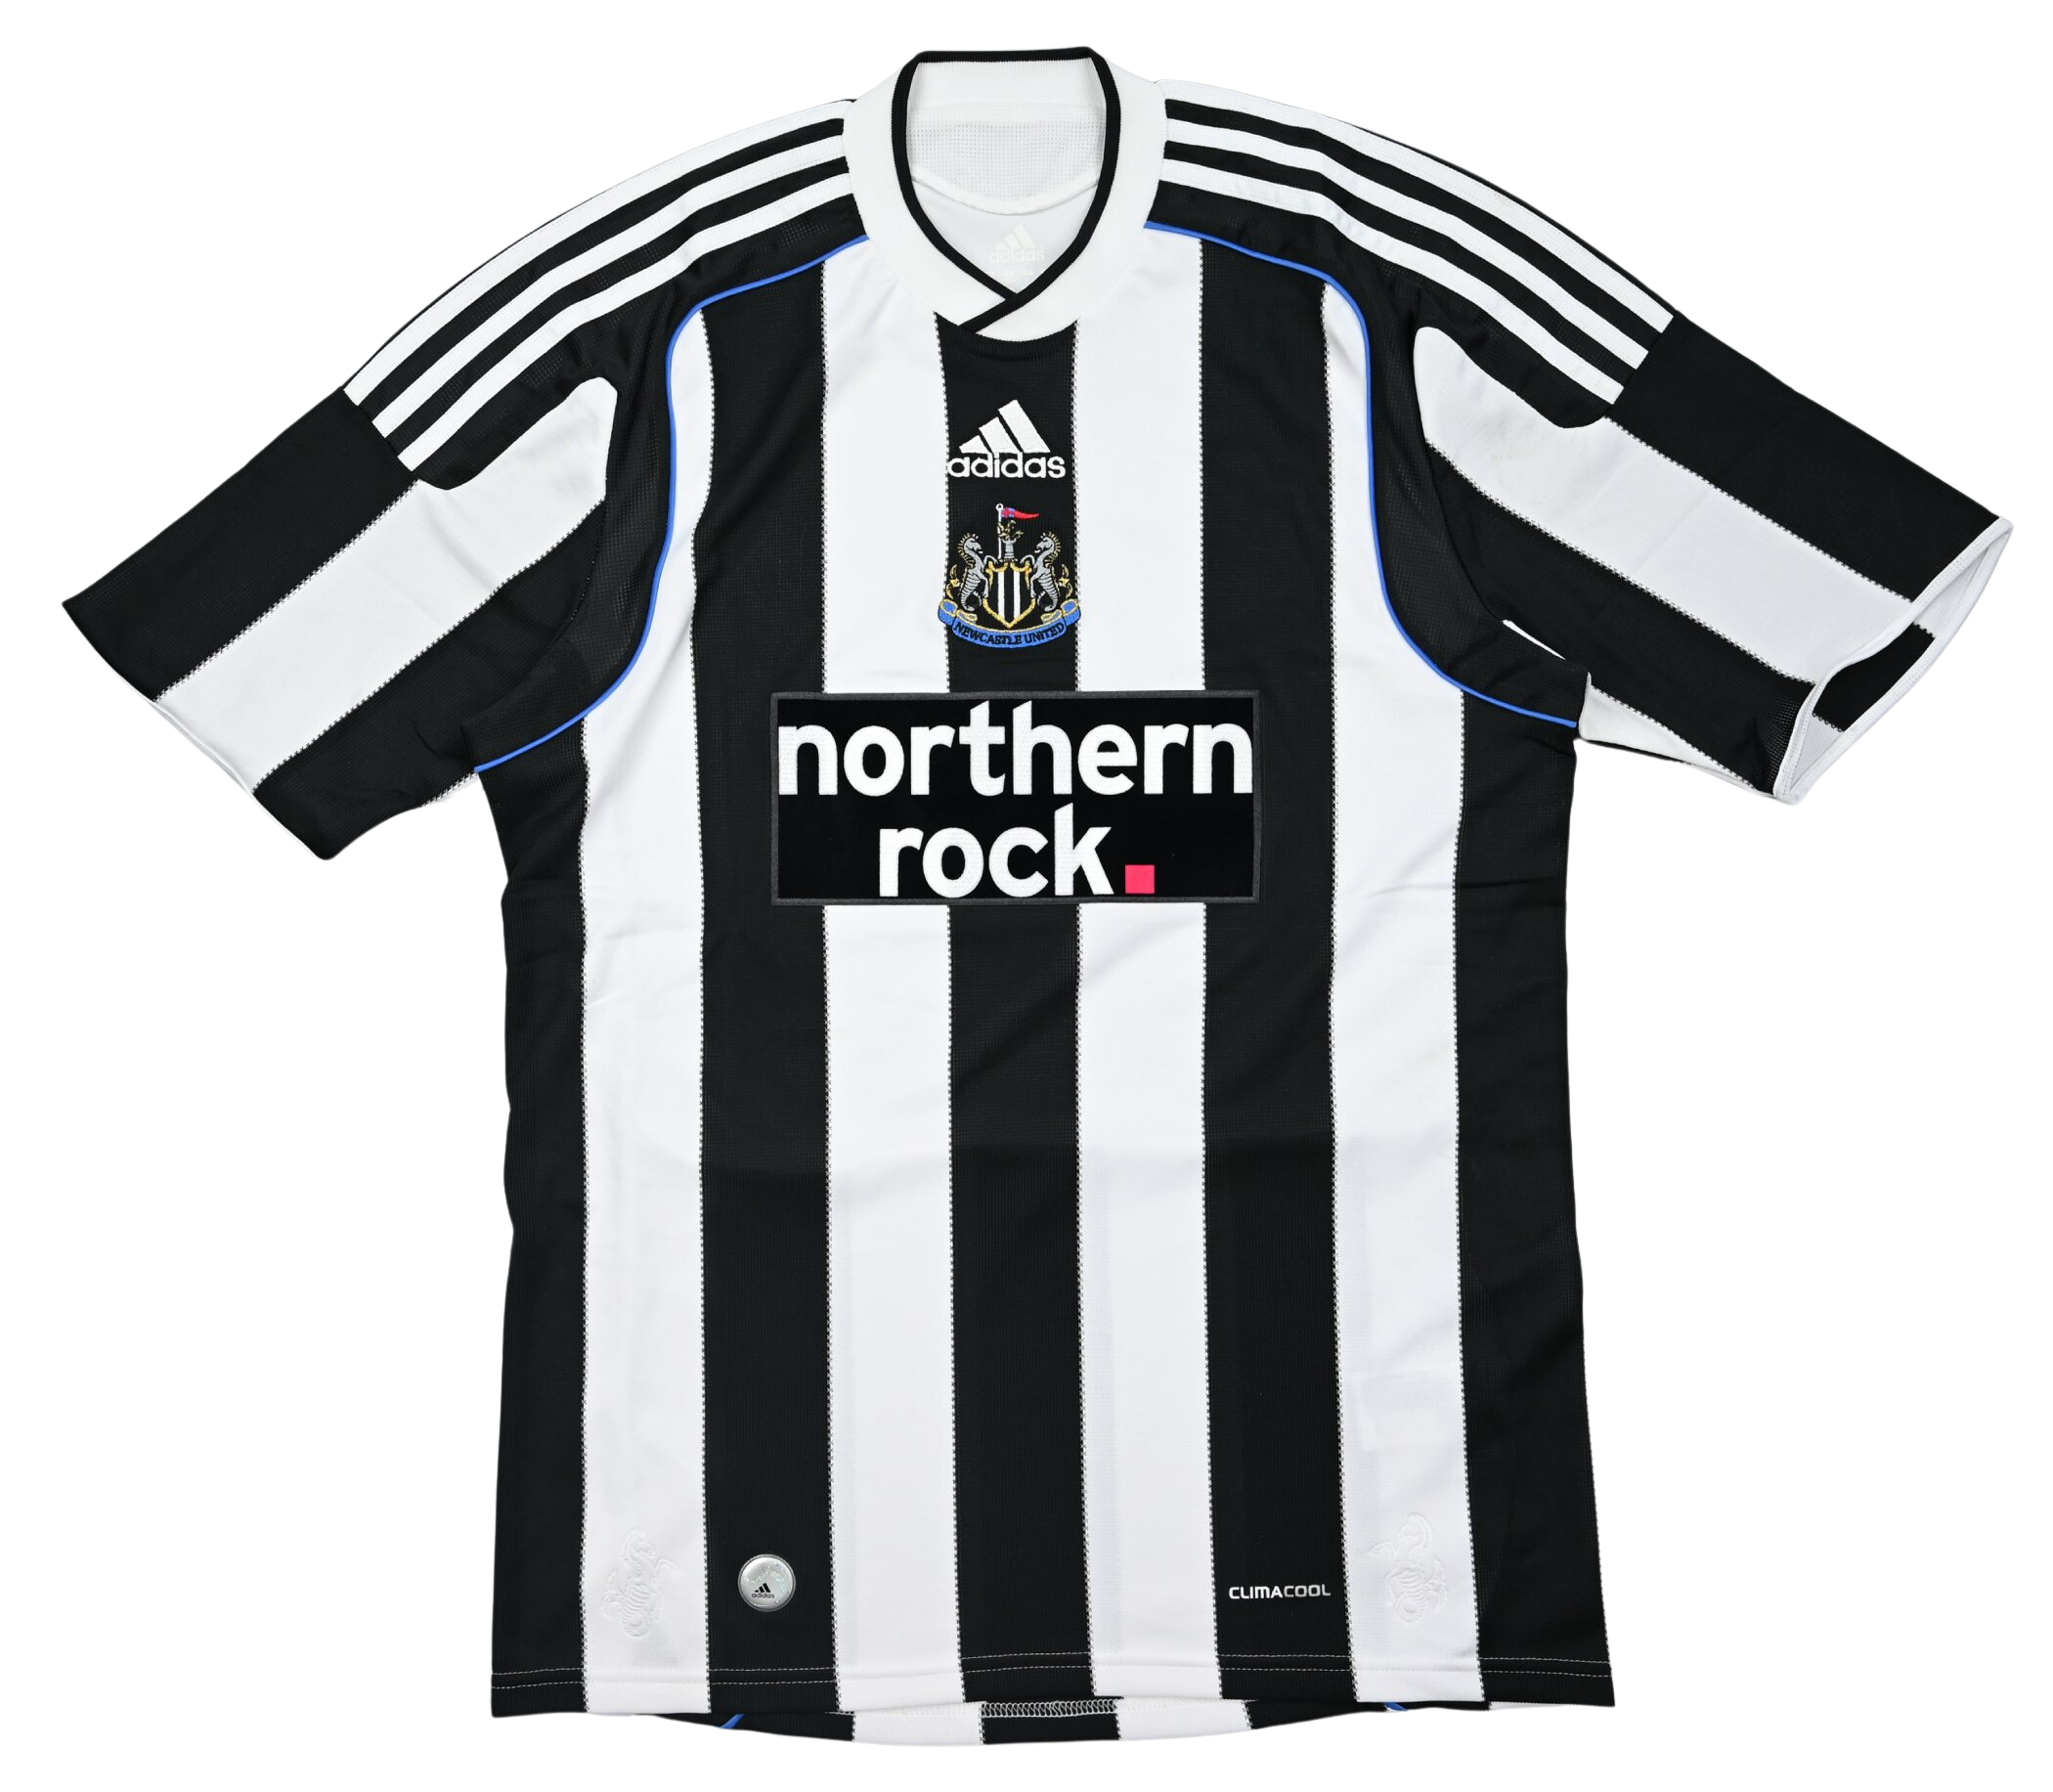 Classic Newcastle United shirts on sale when 'the world's biggest